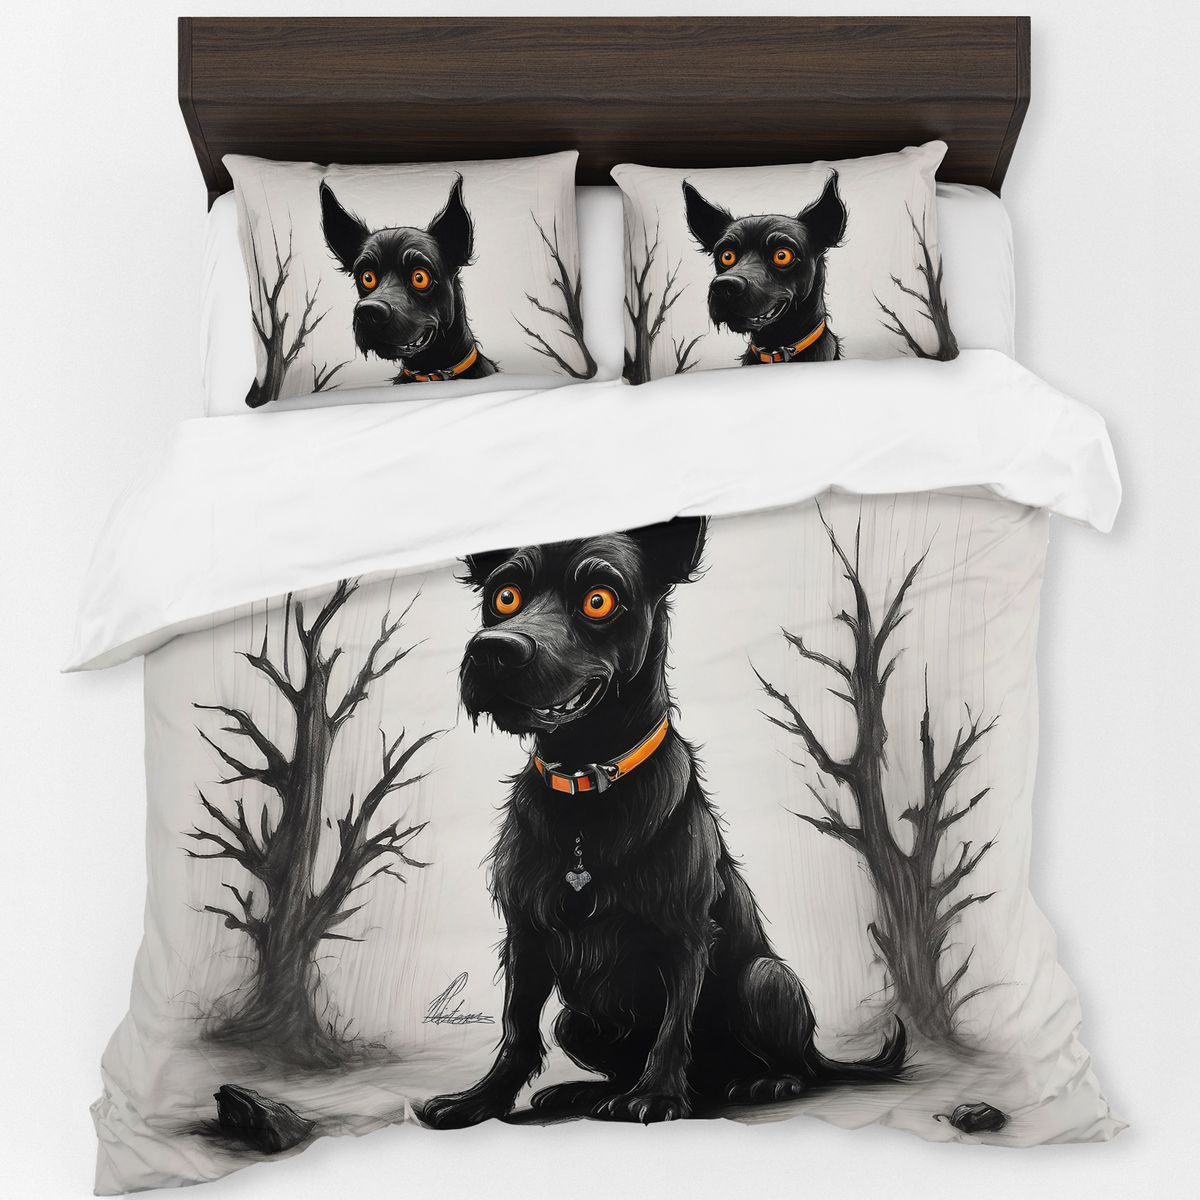 Happy The Dog By Nathan Pieterse Duvet Cover Set